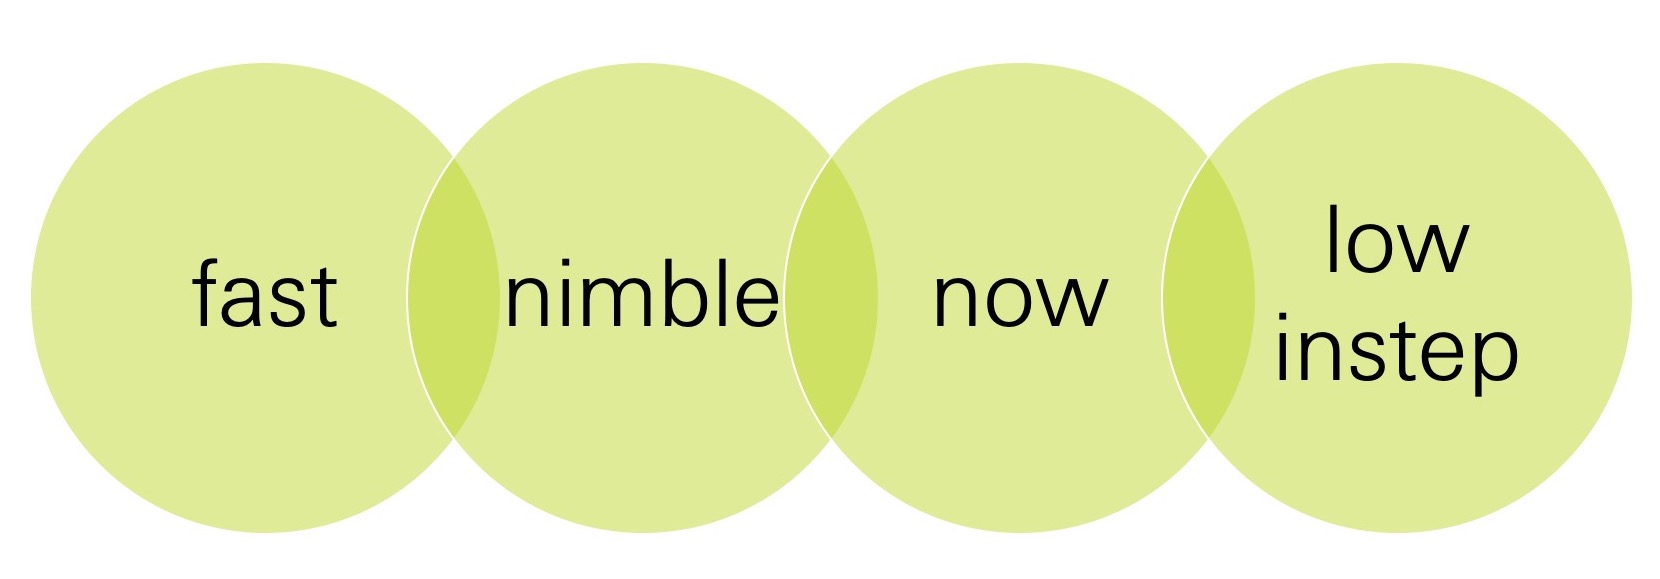 About  page_fast nimble now low instep